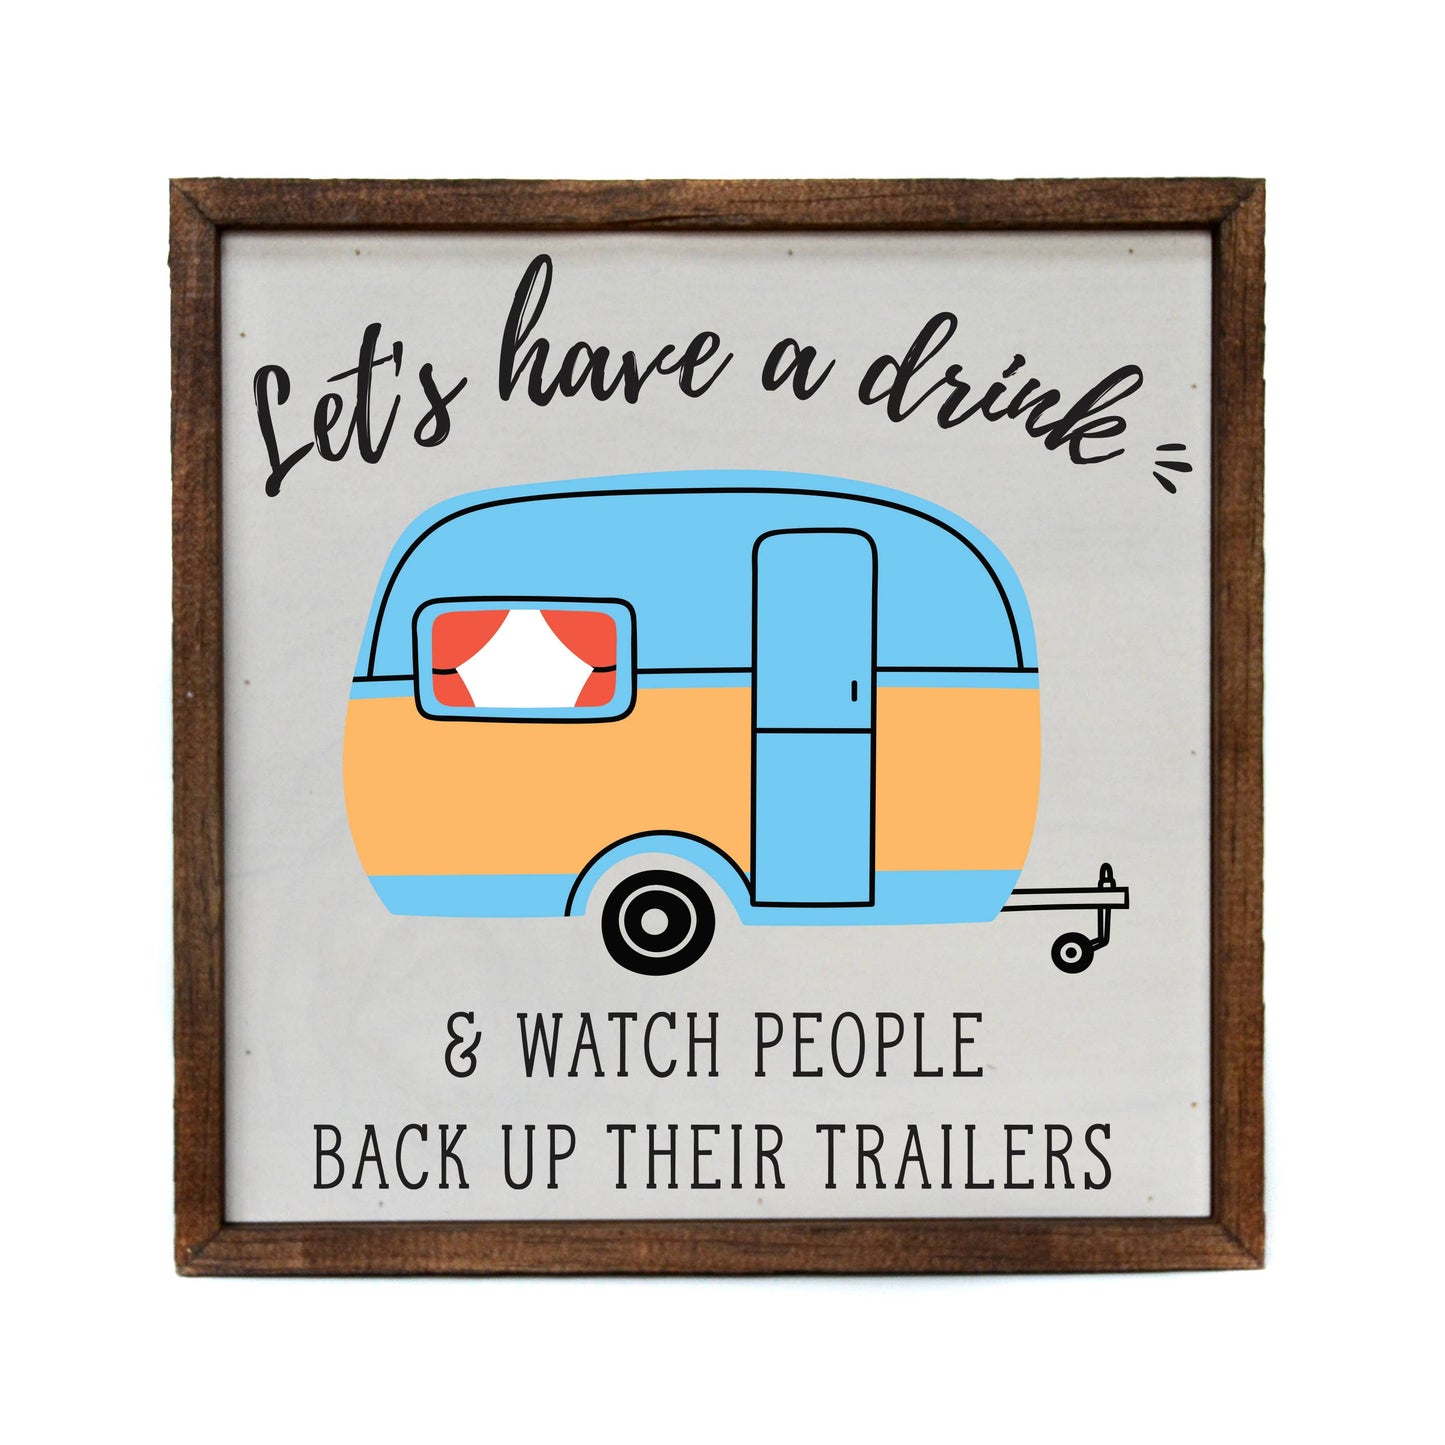 Let's have a drink - Camping Sign - Summer Decor